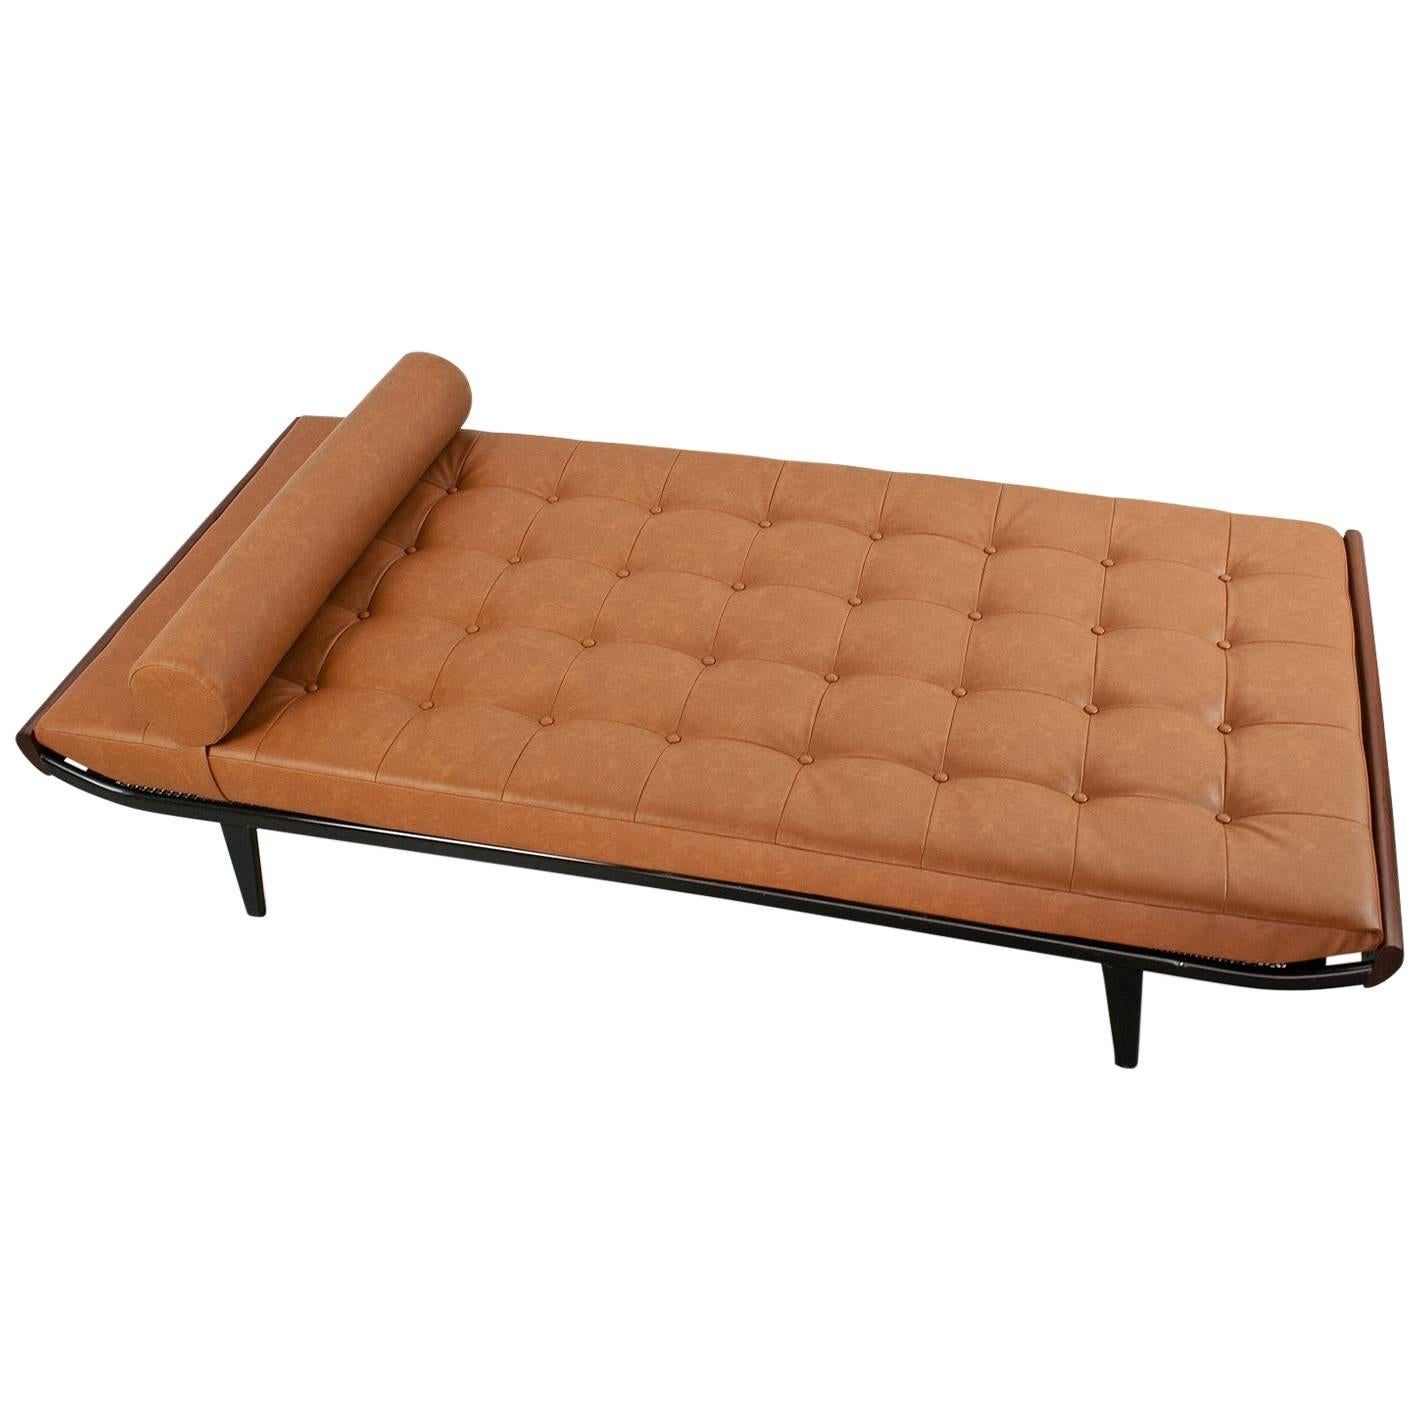 Daybed Cleopatra Dutch Mid-Century Modern by Andre Cordemeyer 1953 for Auping